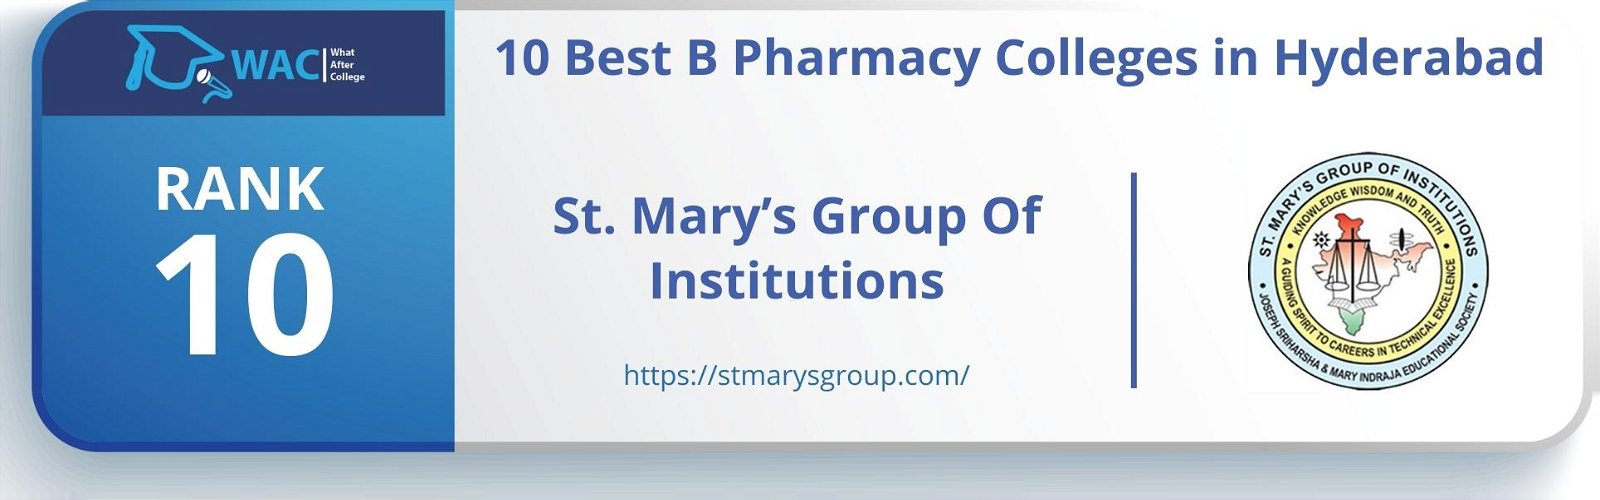 St. Mary’s Group Of Institutions